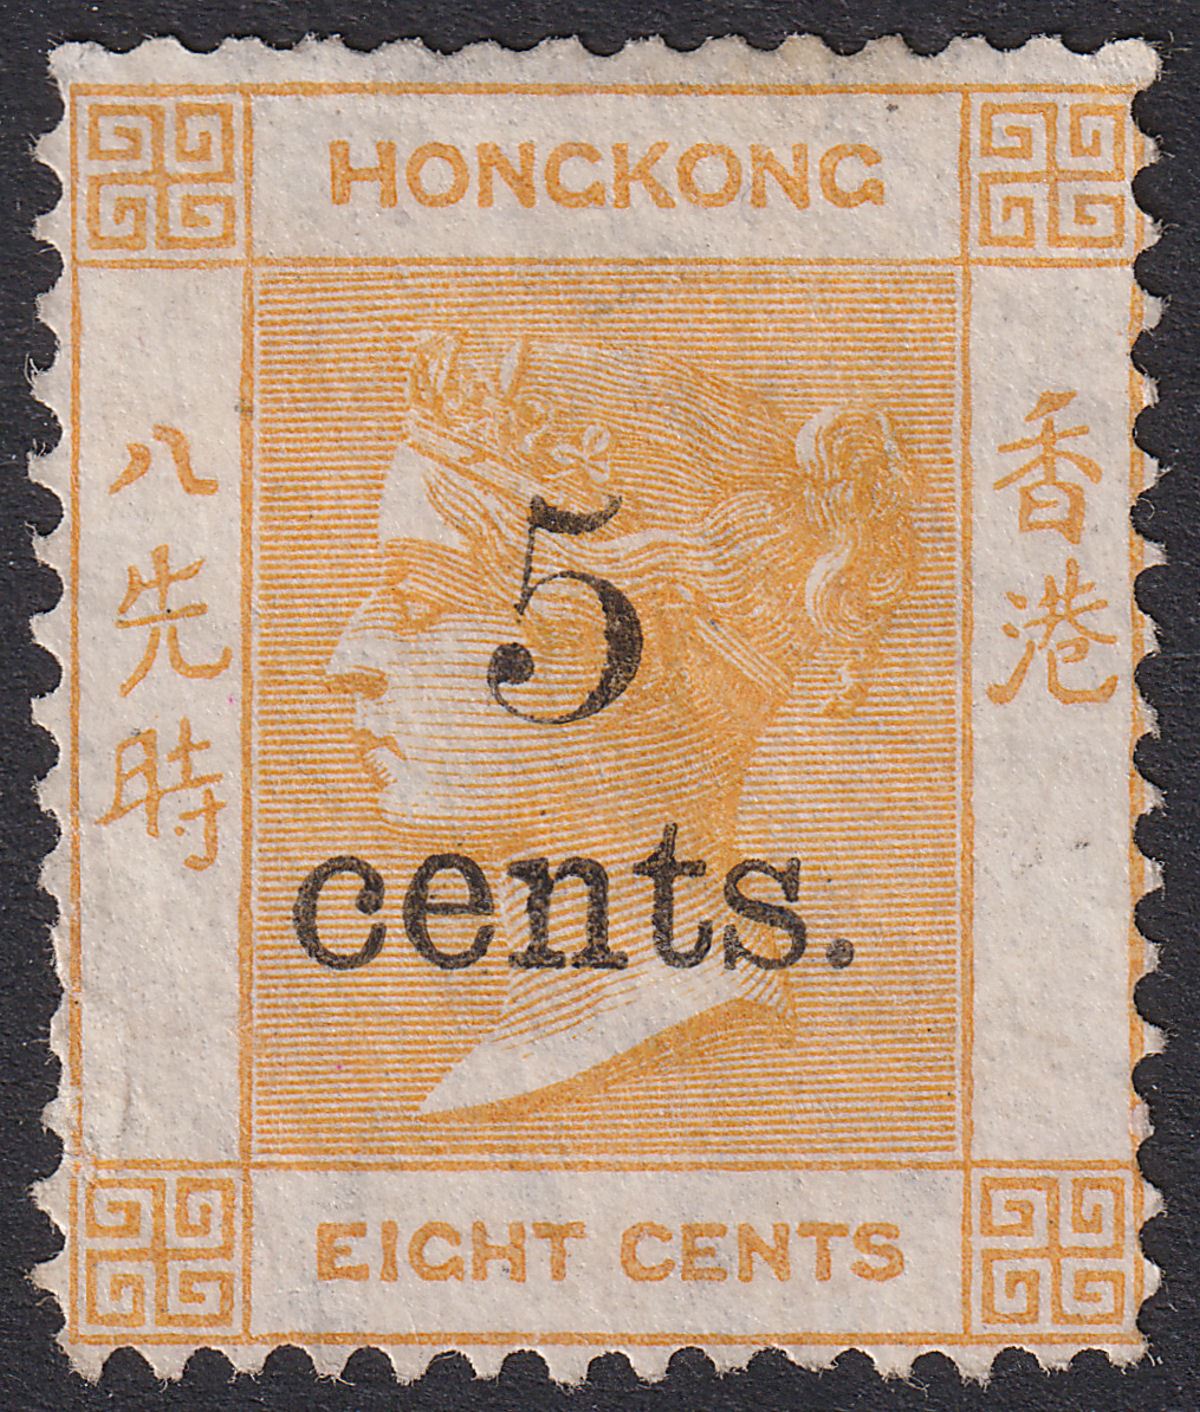 Hong Kong 1880 QV 5c Surcharge on 8c Bright Orange Unused SG23 cat £1100 as mint